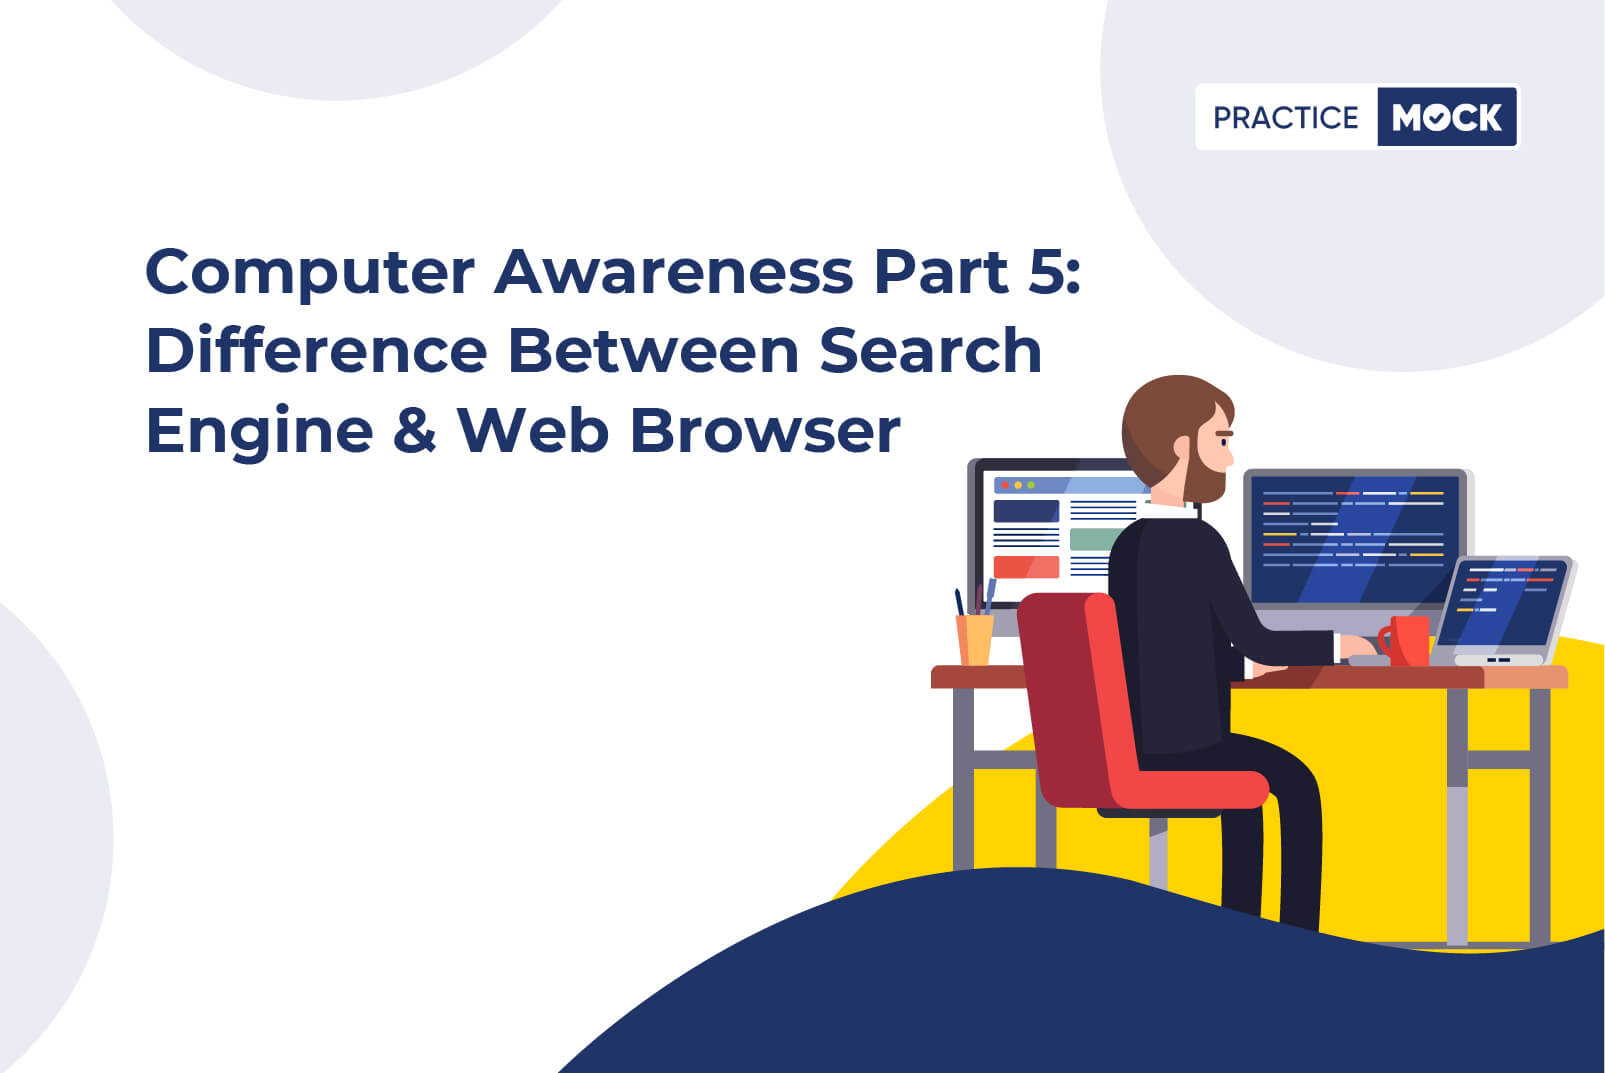 Computer Awareness Part 5-Difference Between Search Engine & Web Browser